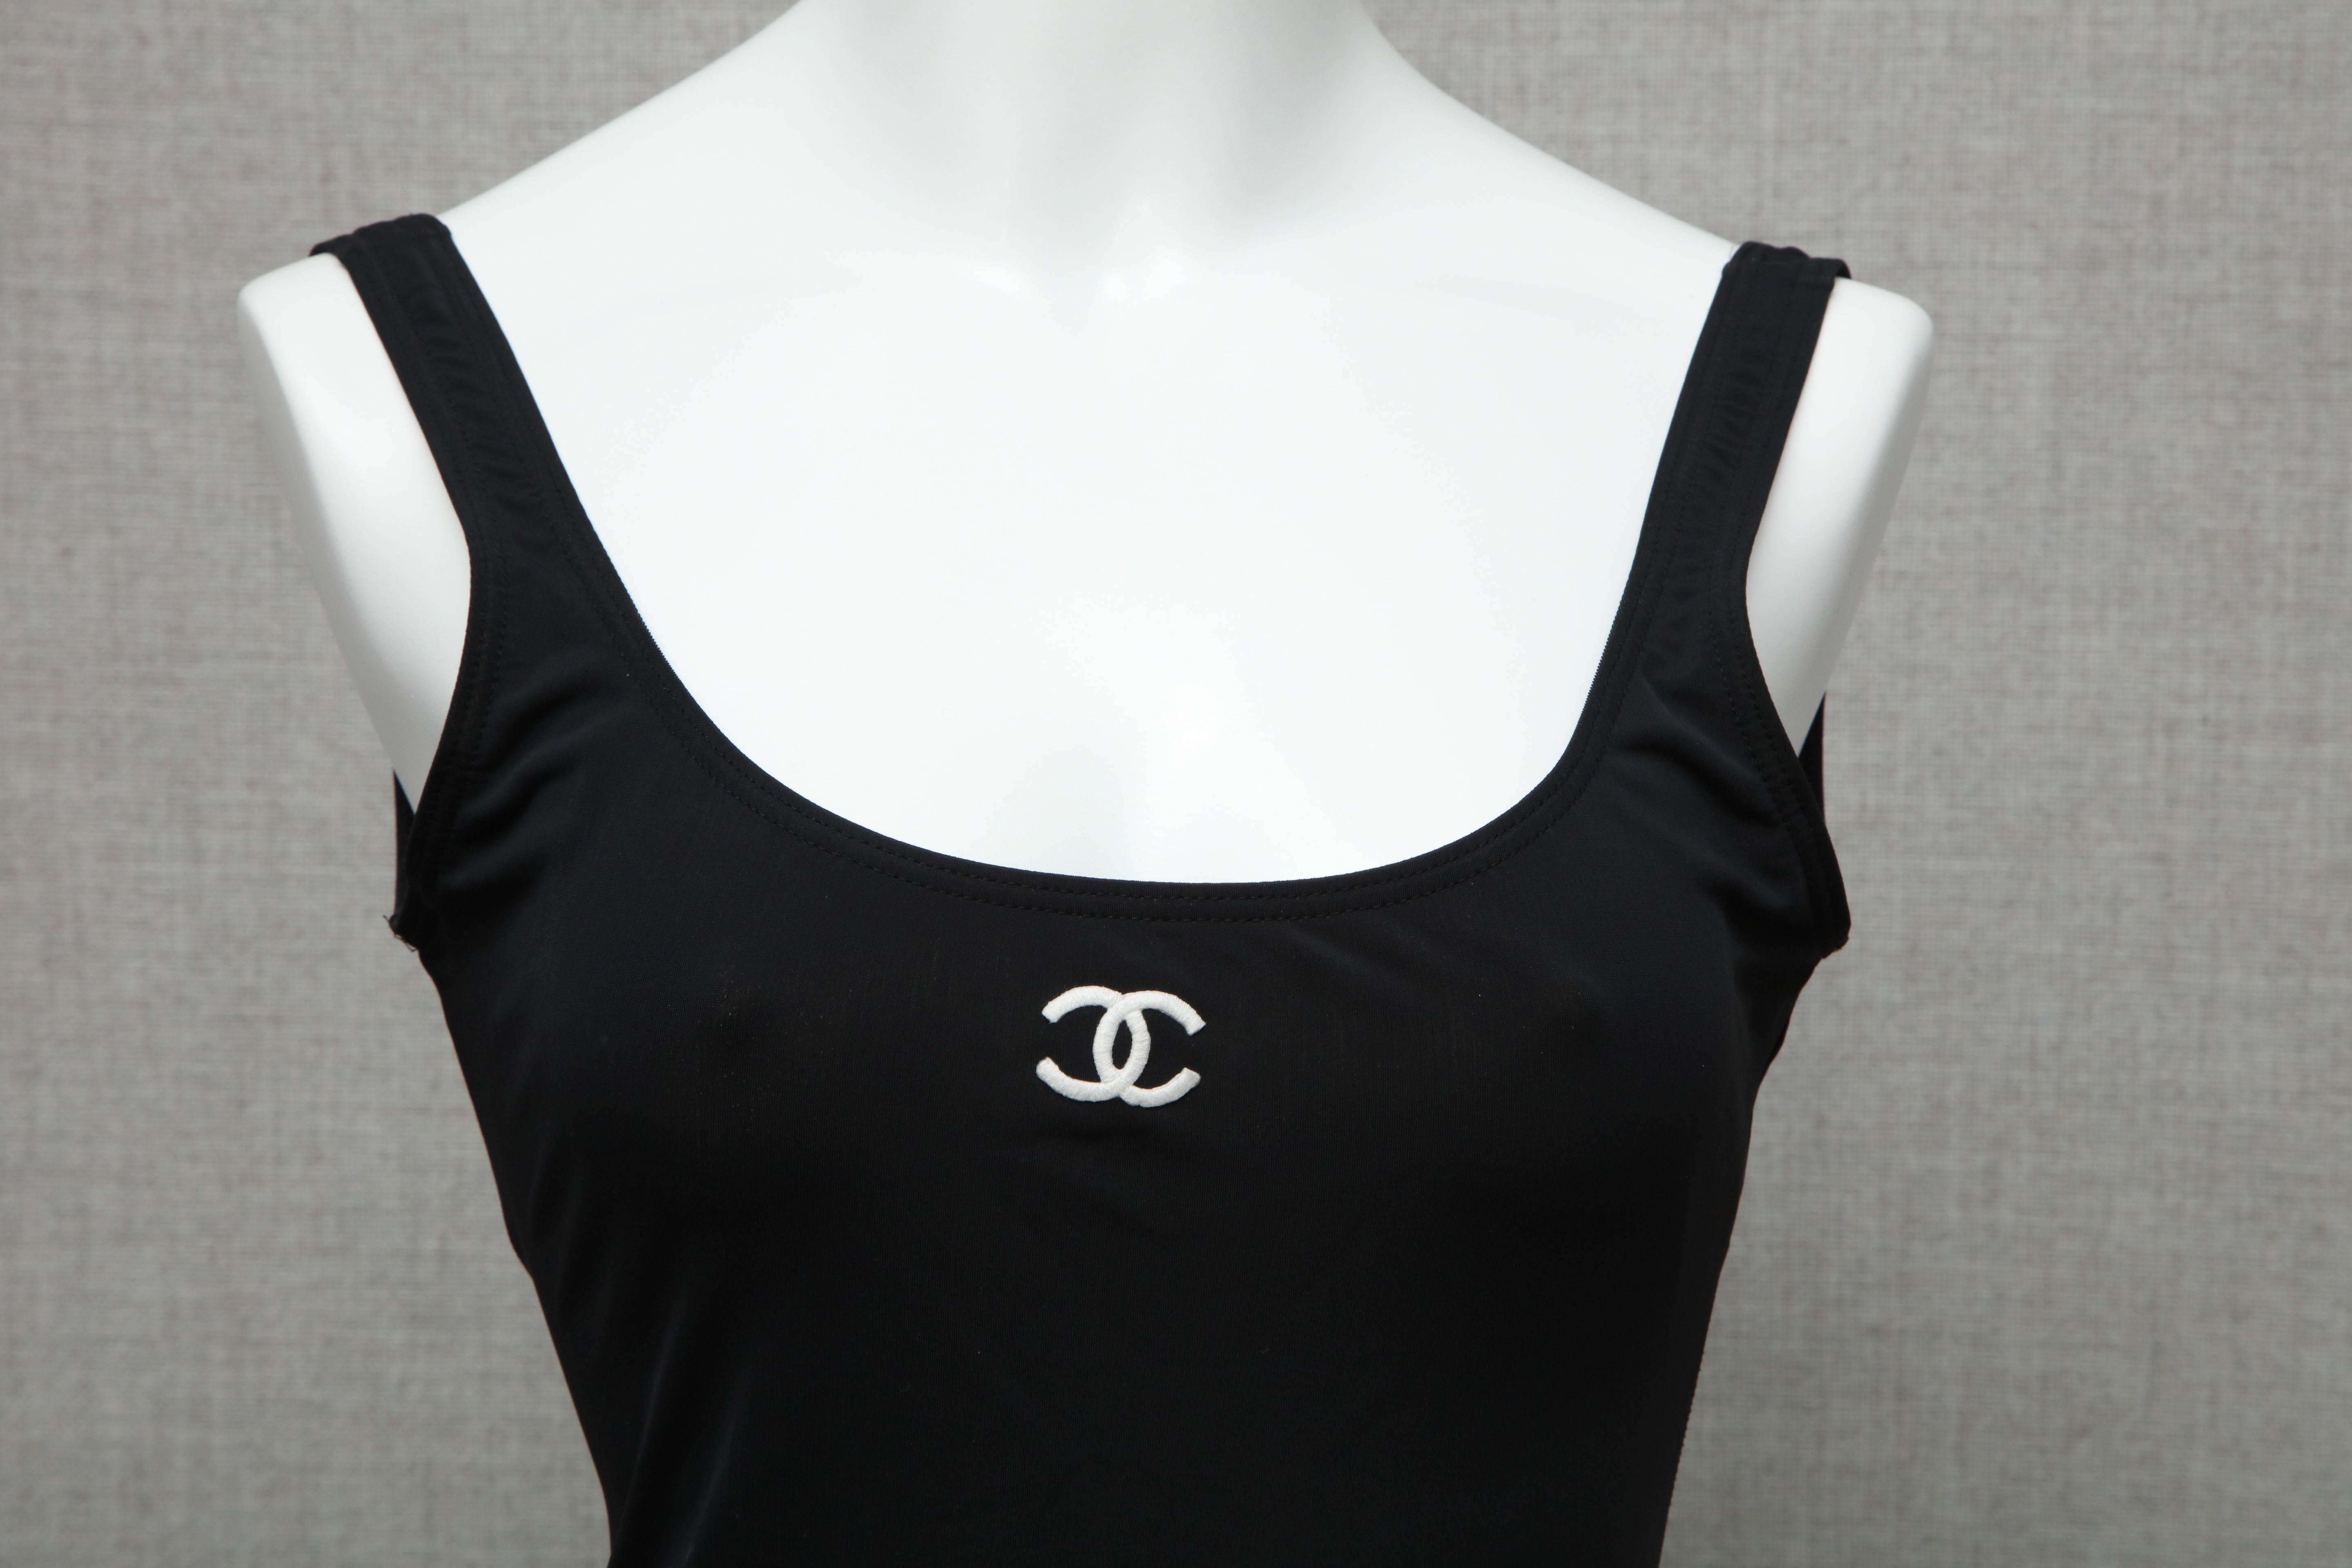 Chanel black and white swimsuit with iconic CC logos. 
FR 38